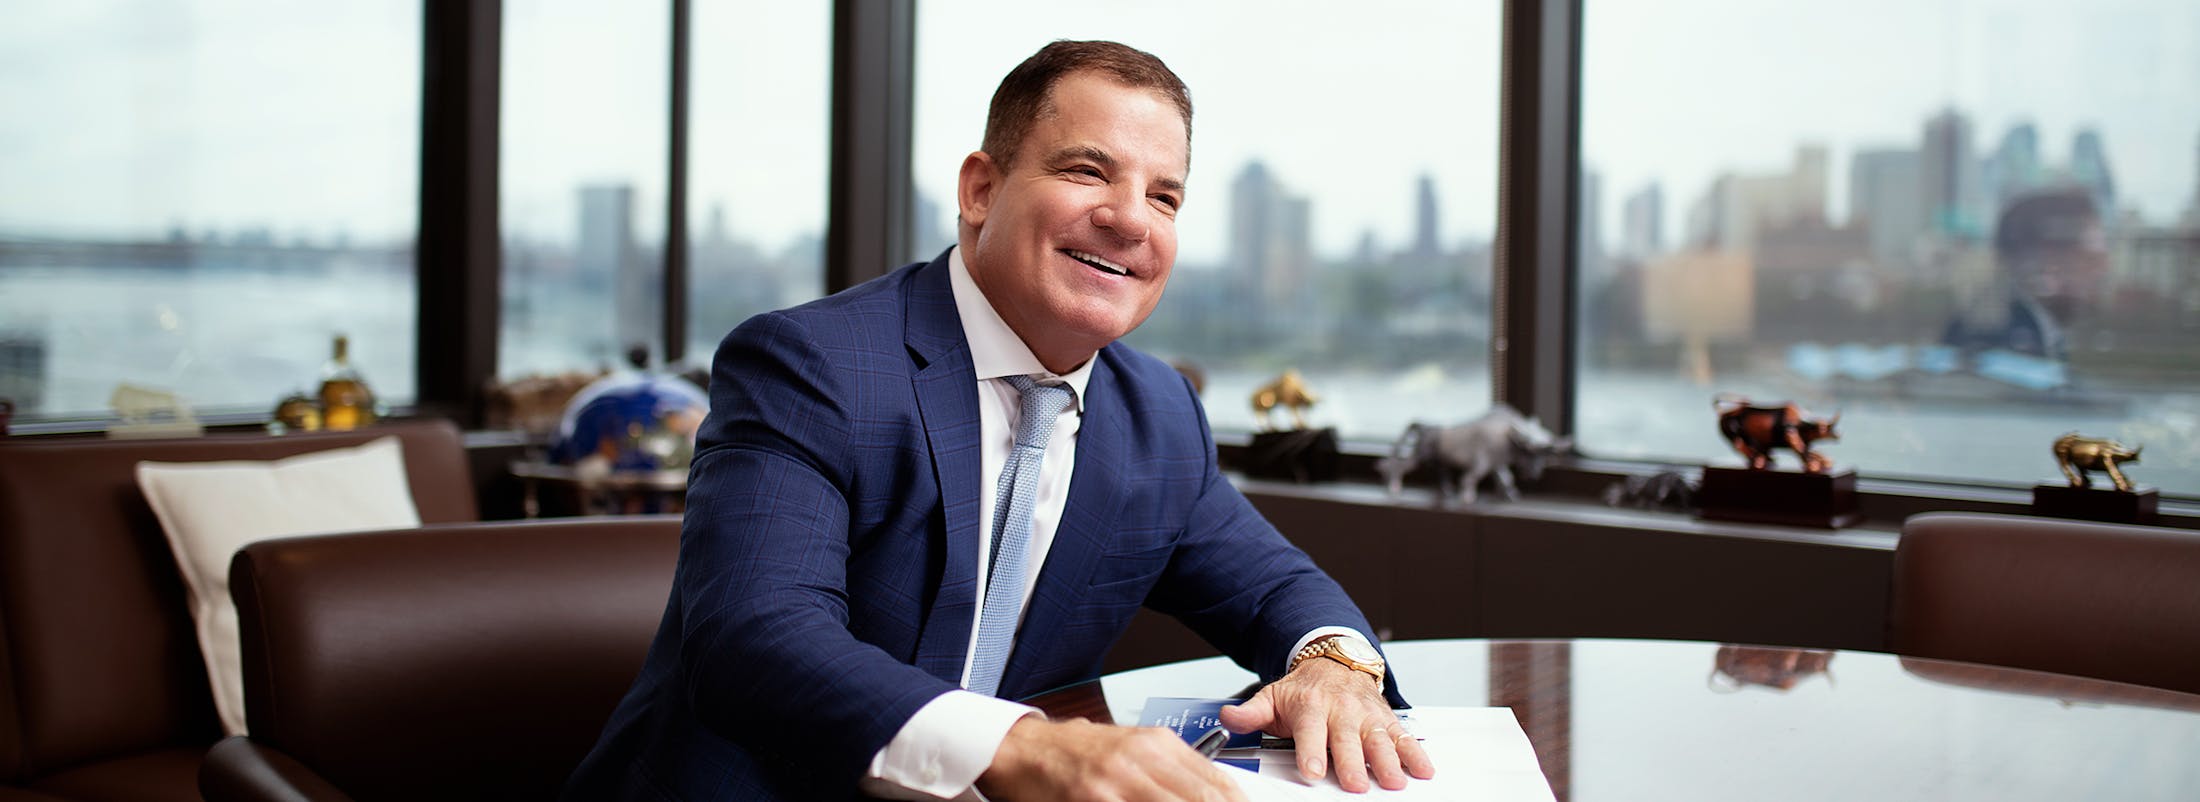 Michael S. Lamonsoff, accident lawyer in New York City, smiling at his desk